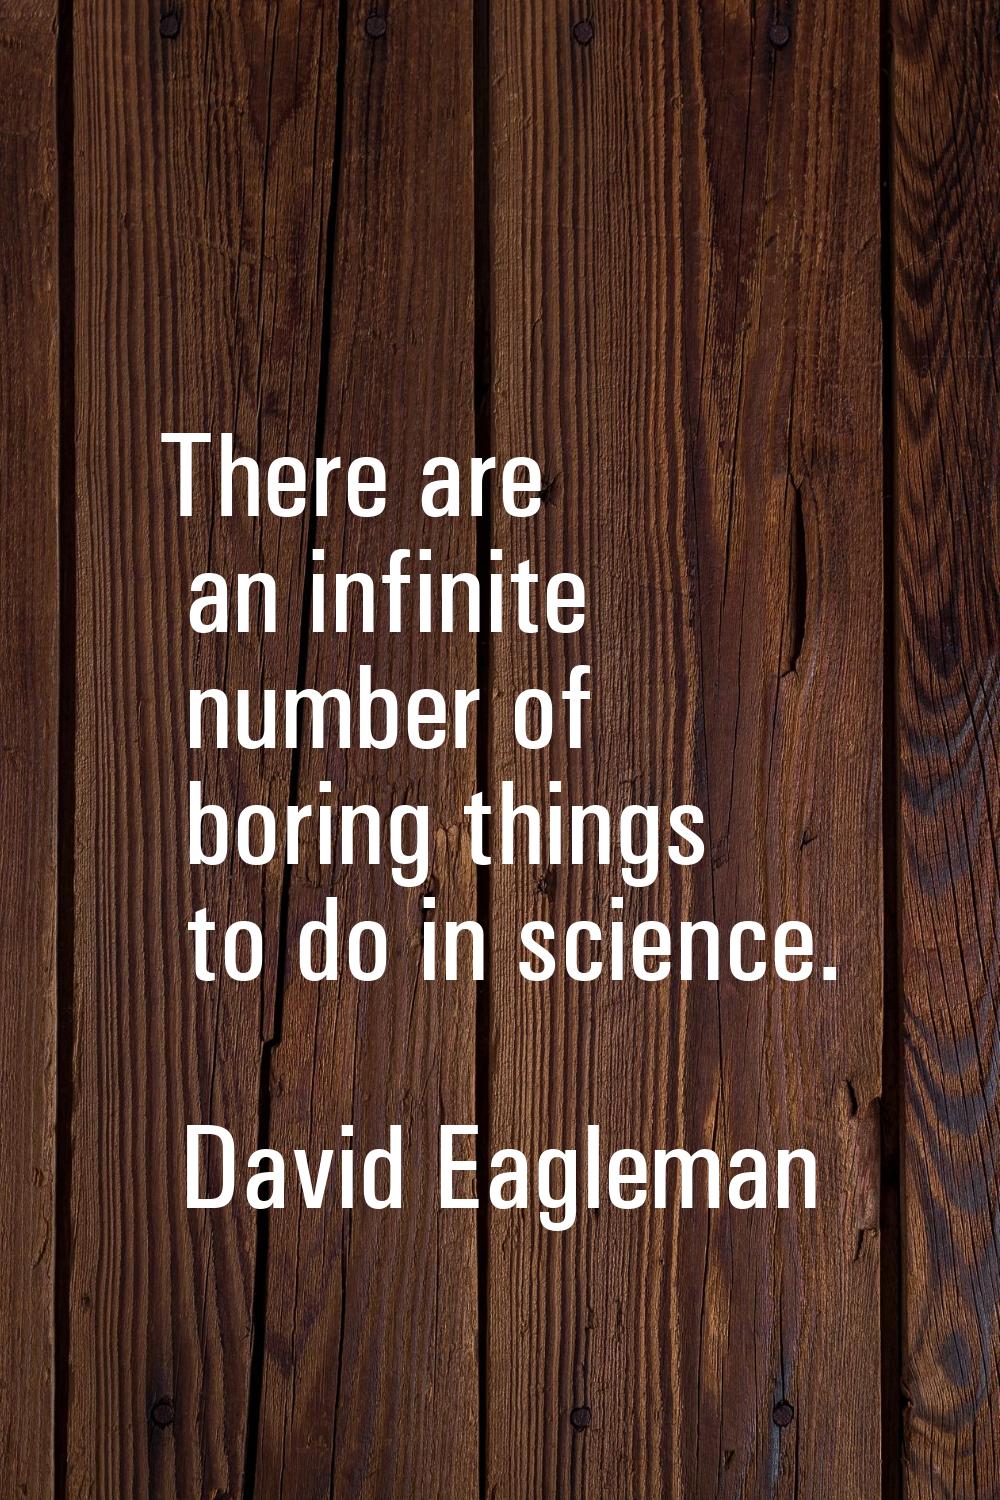 There are an infinite number of boring things to do in science.